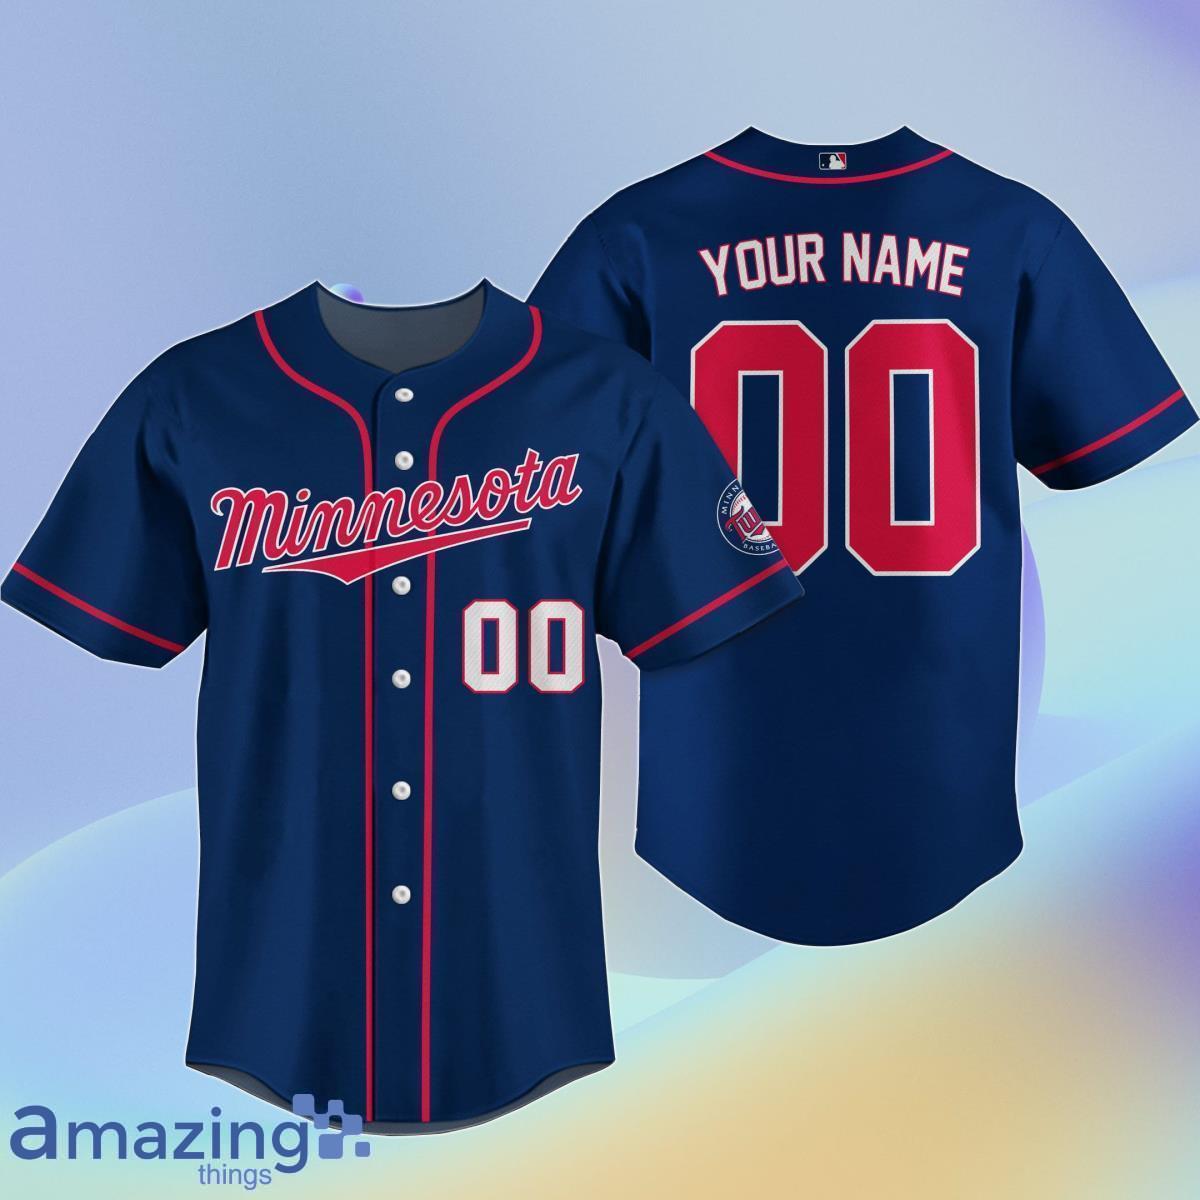 Minnesota Twins Custom Name & Number Baseball Jersey Special Gift